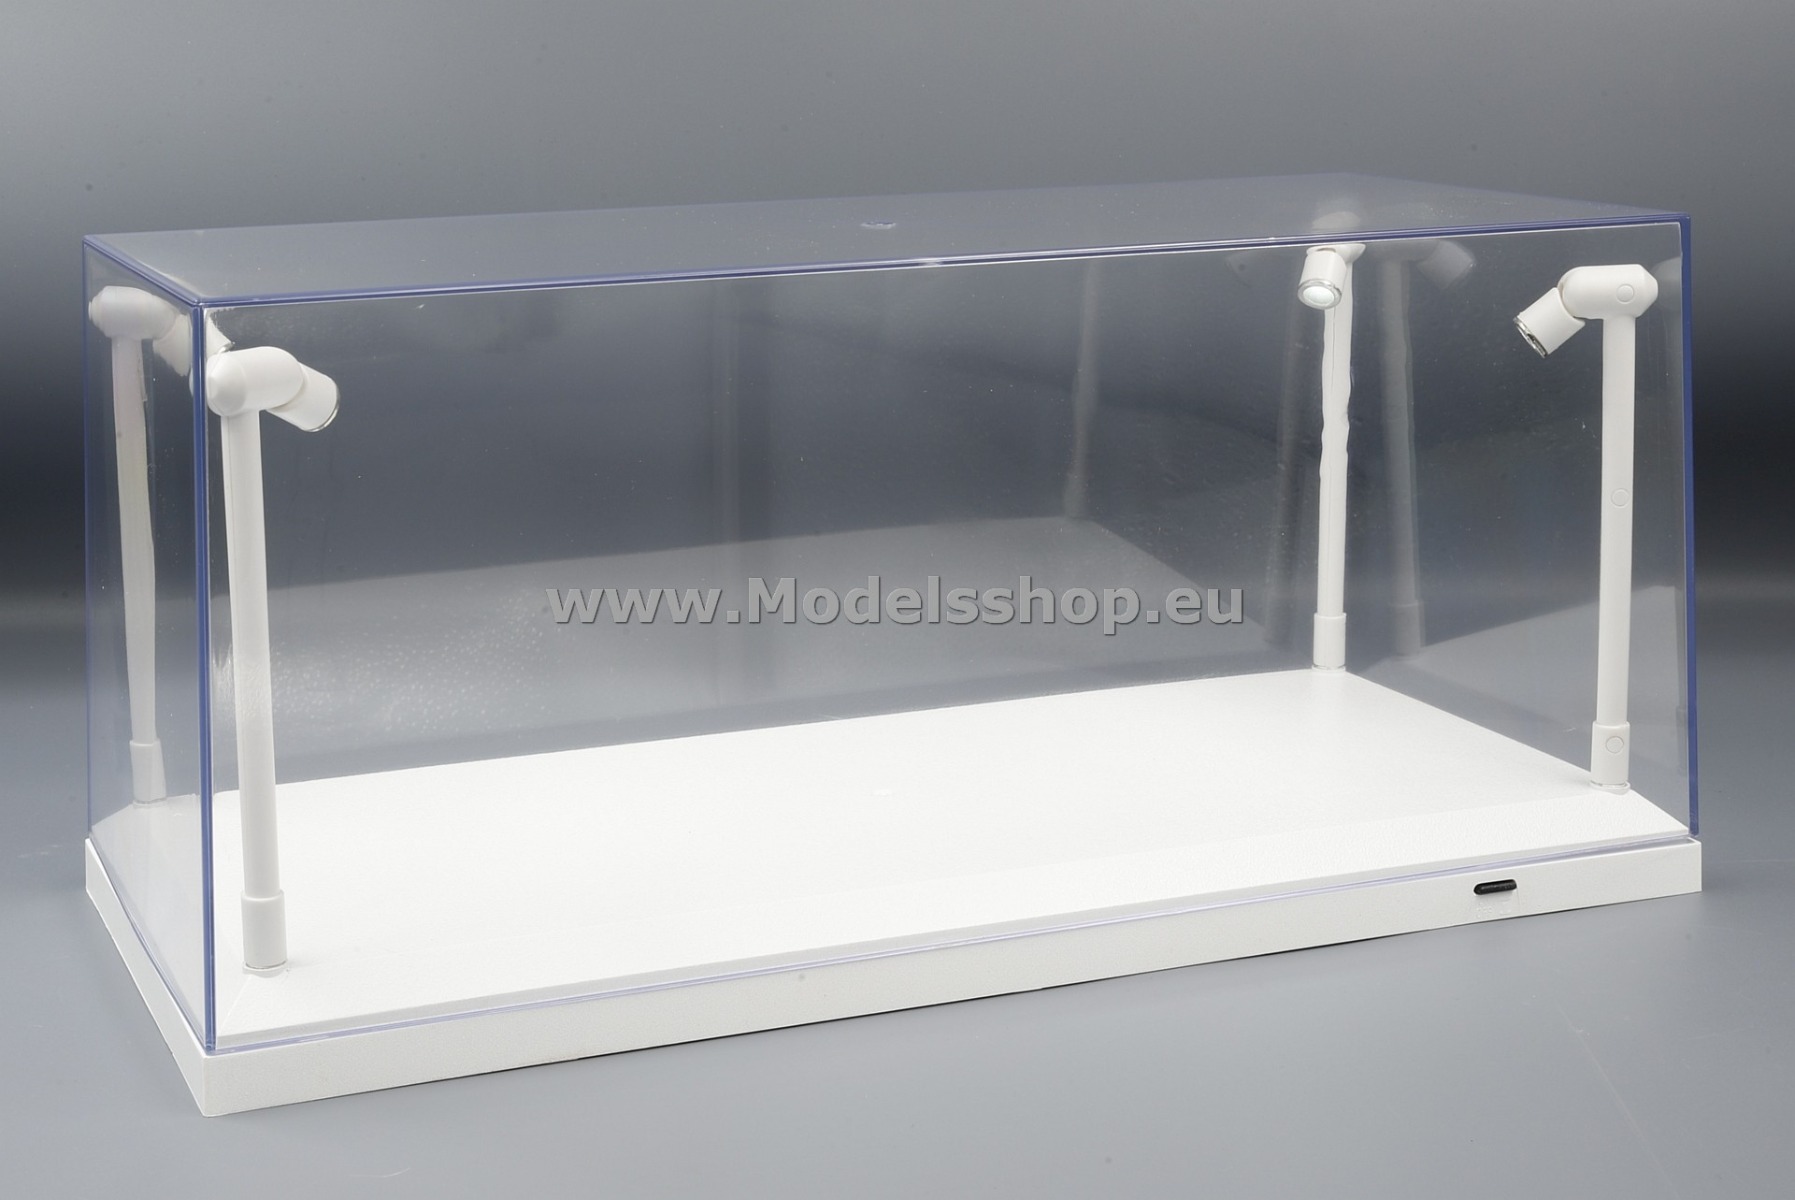 LED Display case / box for 1/18 model. Comes with 4 ultra bright LED, adjustable light, uses 4x AA batteries (not included)